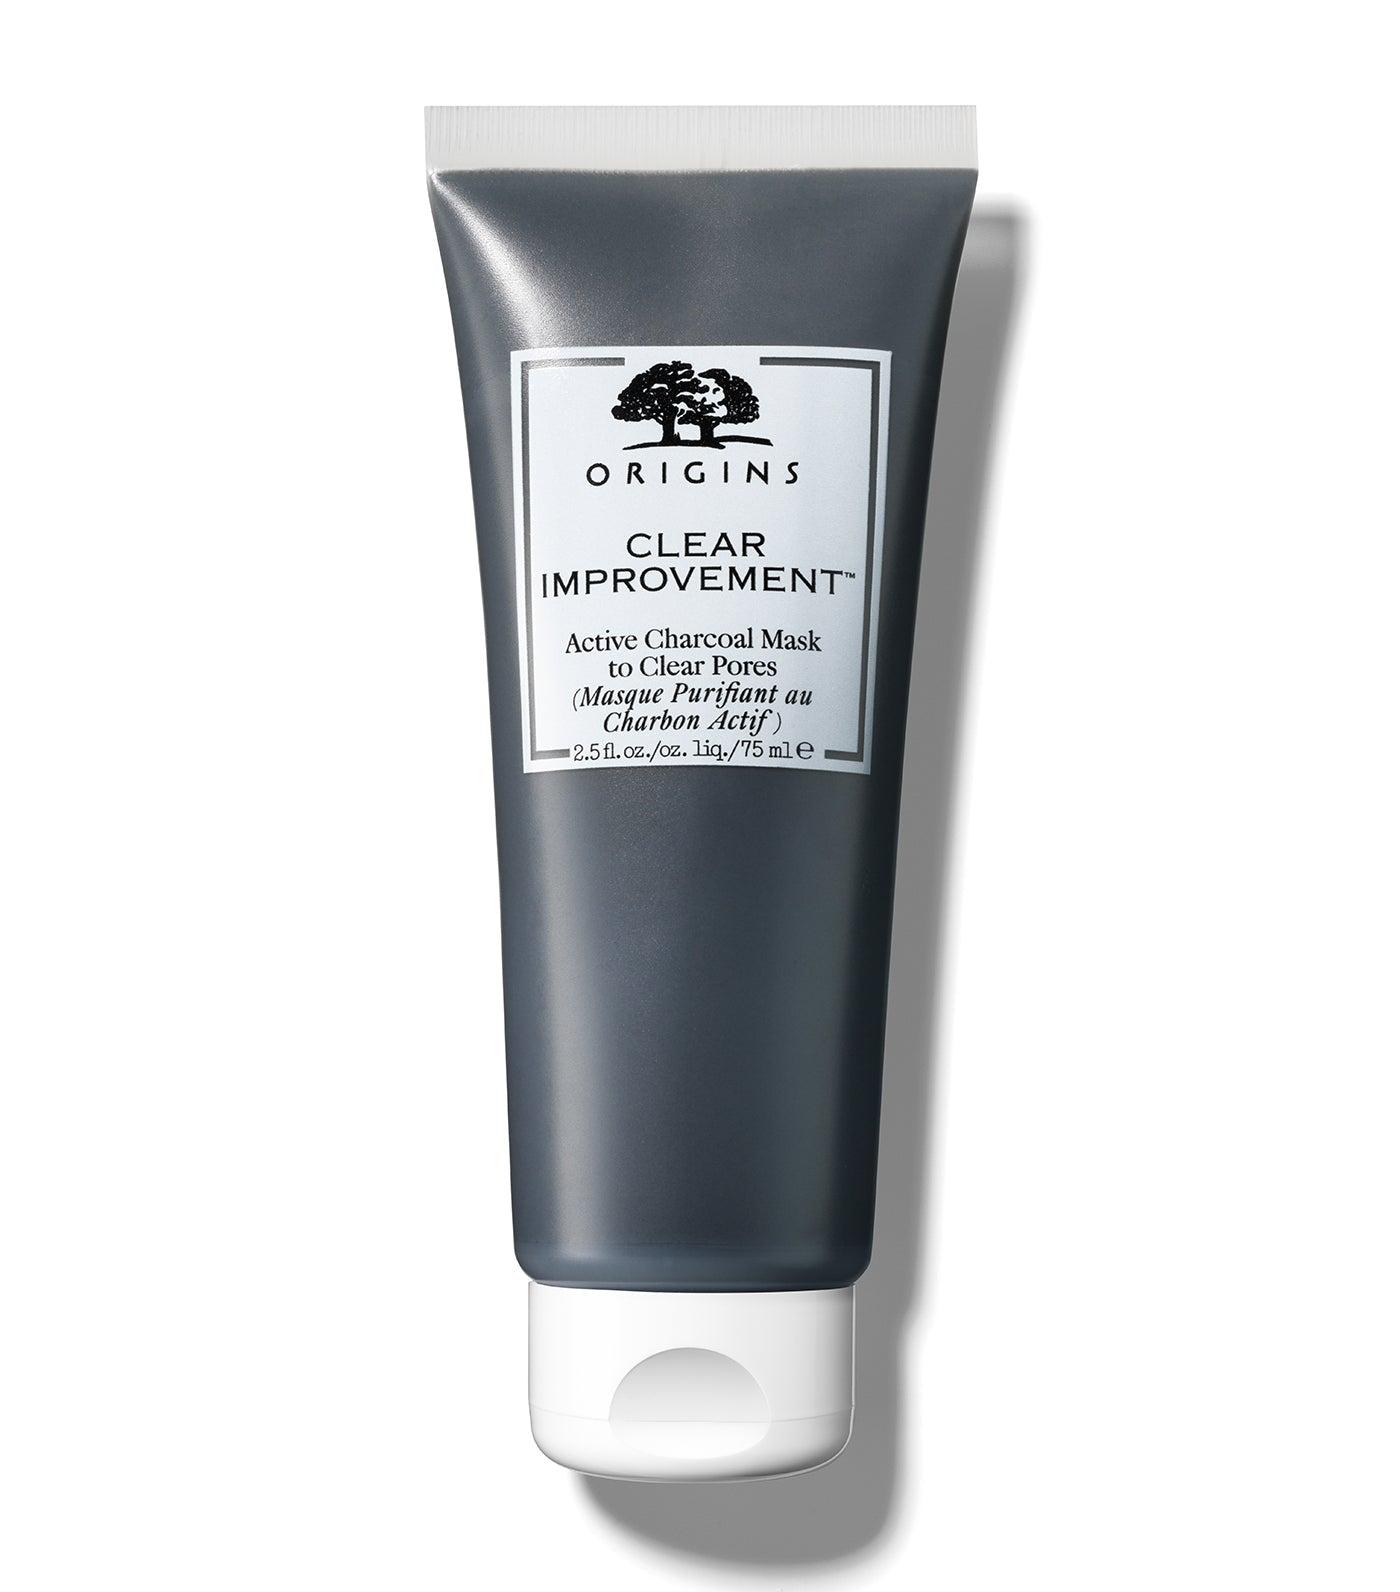 Clear Improvement, Active Charcoal Mask to Clear Pores